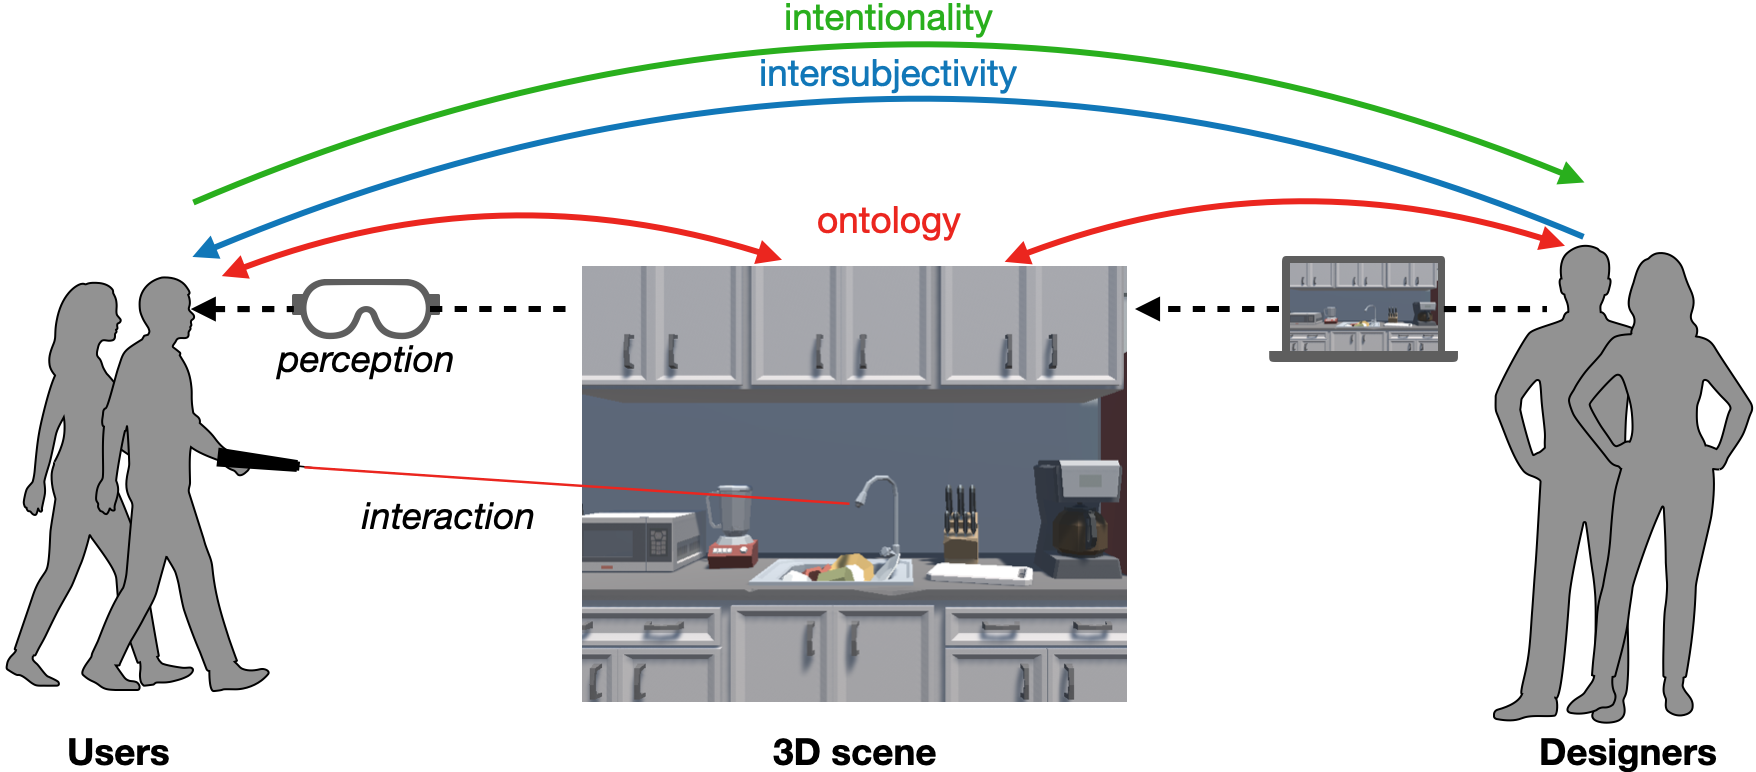 The figure depicts a 3D scene in the middle with two categories of users: scene designers on the right and users who experiences the scene on the left. Red arrows indicating “ontology” point from both sets to the 3D scene. Blue arrows indicating “intersubjectivity” point from the designers to the users. Finally, green arrows indicating “intentionality” point from the users to designers. A dotted arrow goes from the Designers, through a computer, to the 3D scene, indicating that the scene is created by Designers using computational tools. Another dotted arrow labelled “perception” goes from the 3D scene through a headset to the Users. Users hold a controller with a laser pointing towards the 3D scene, labelled as “interaction”.